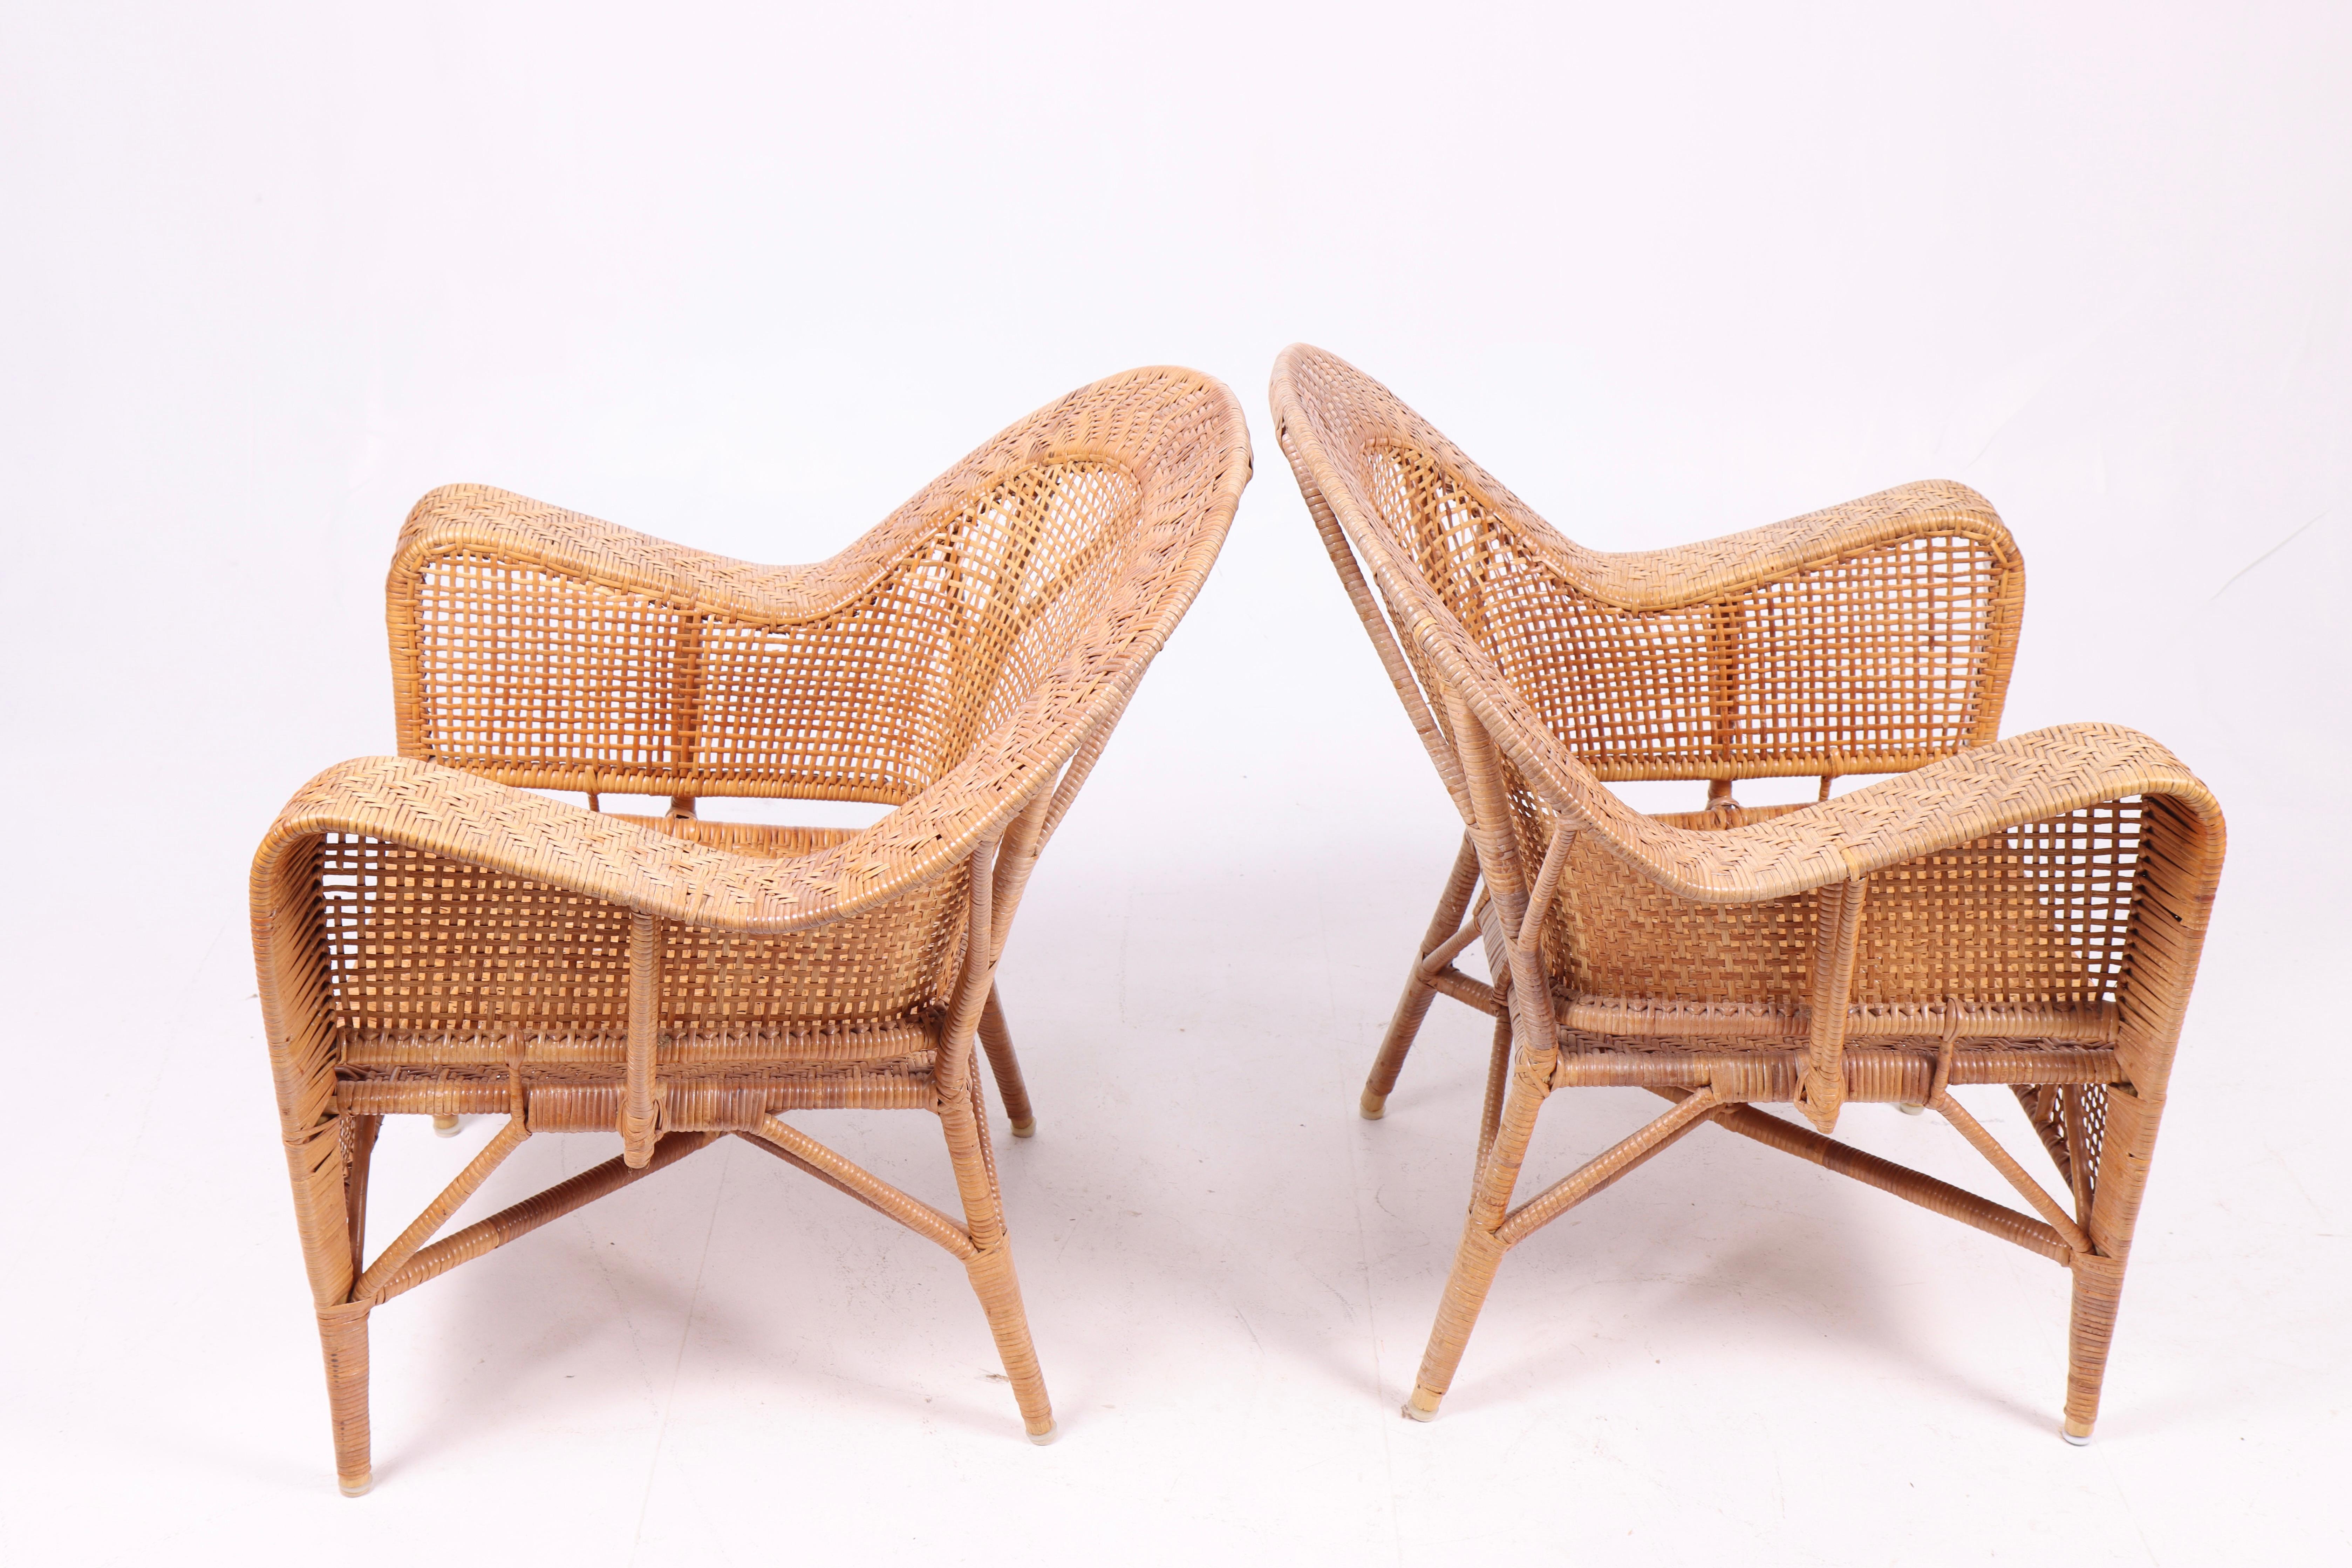 Pair of Rattan Lounge Chairs by Kay Fisker, 1950s For Sale 3